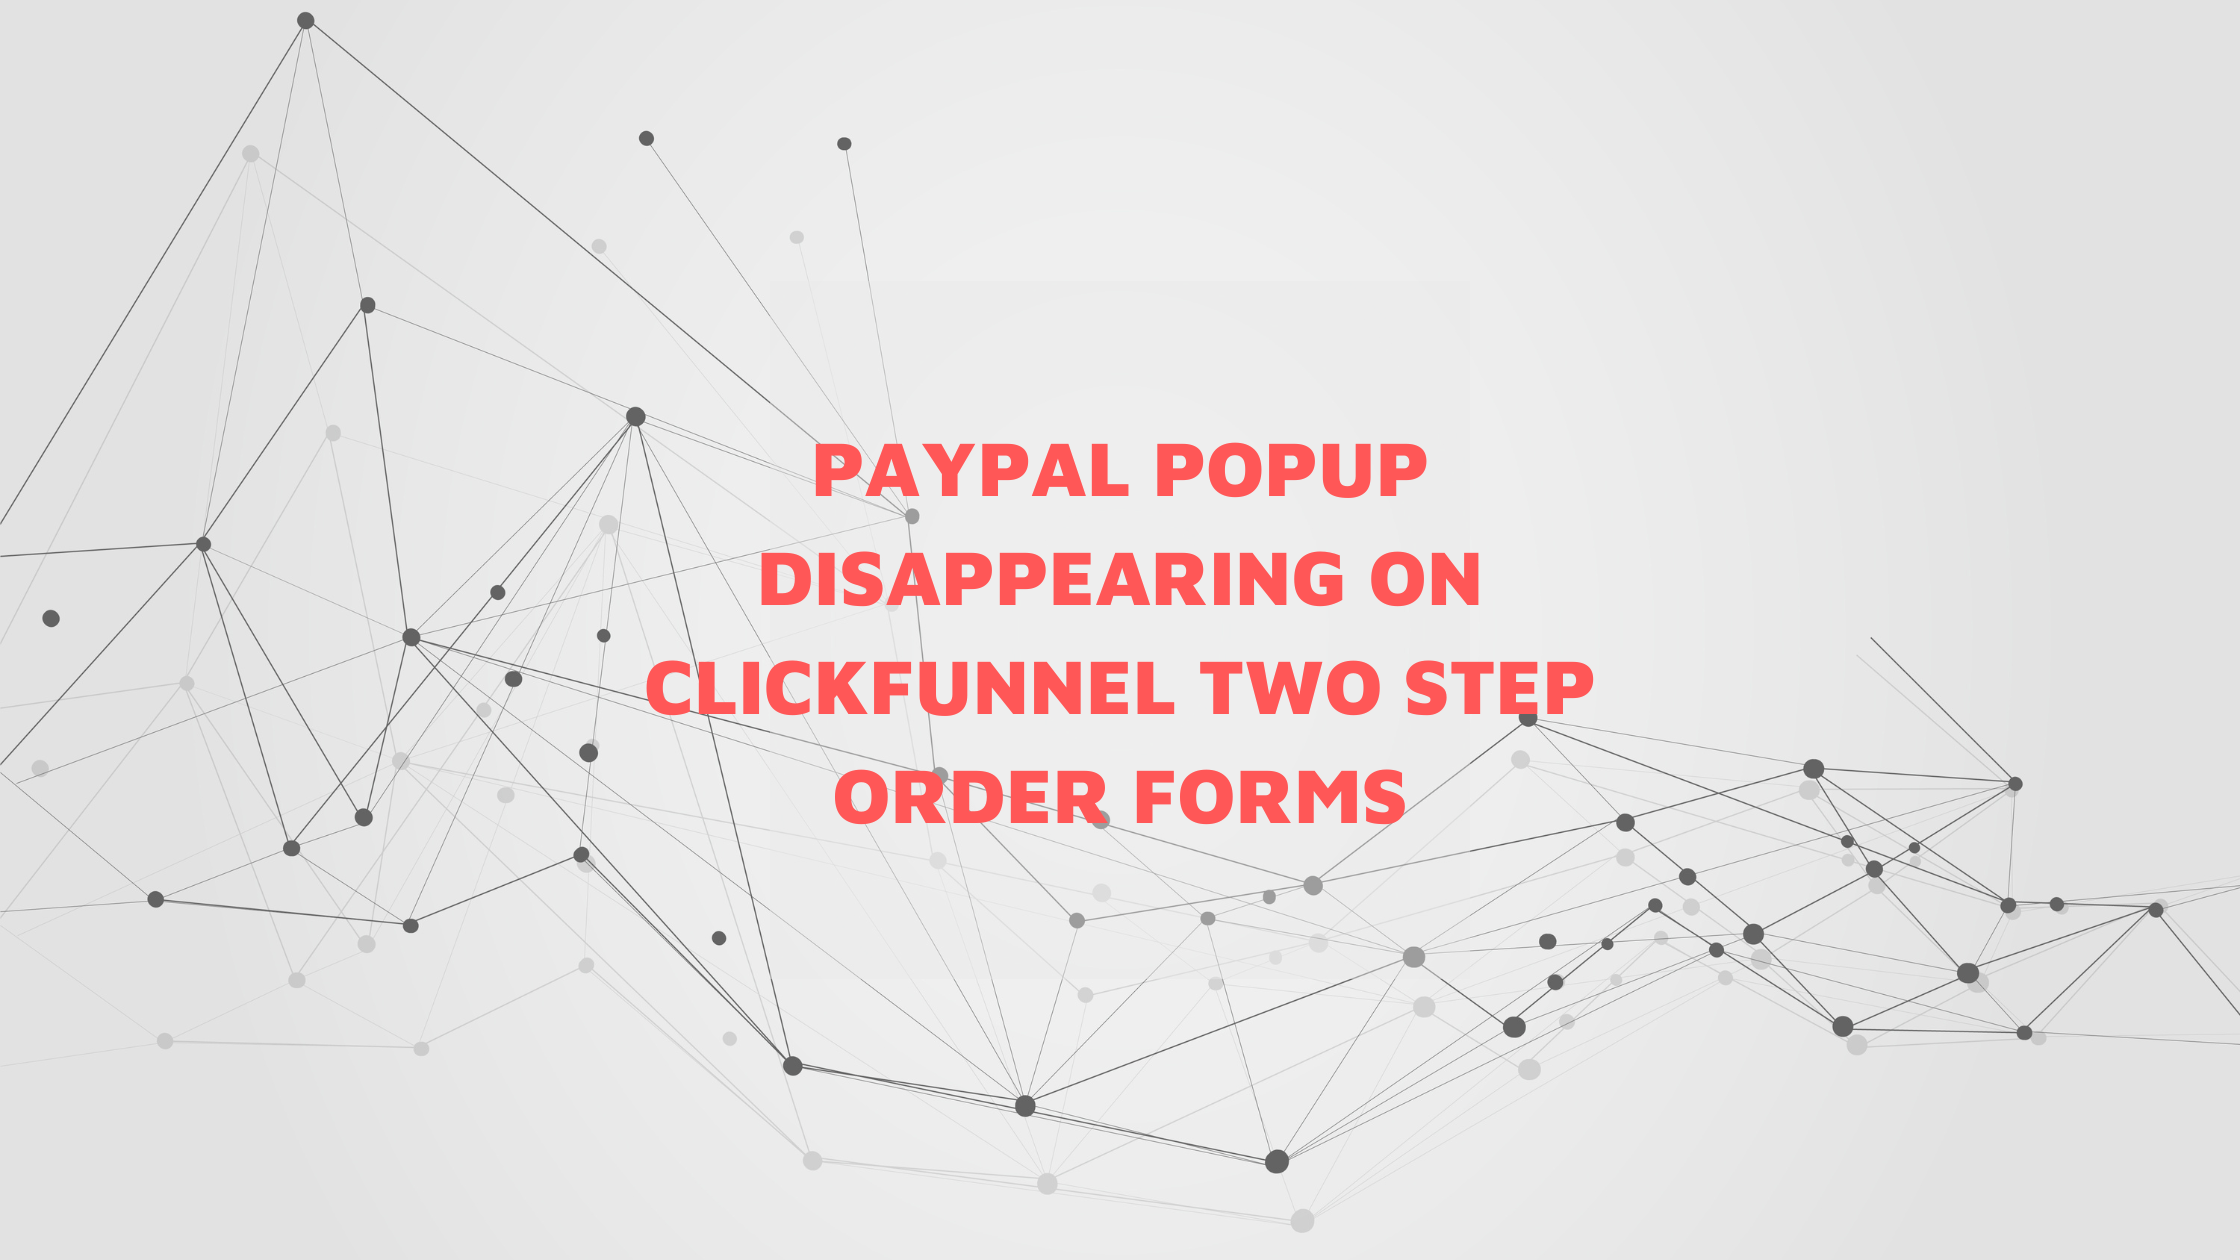 PayPal Popup Disappearing on ClickFunnel Two Step Order Forms Solution